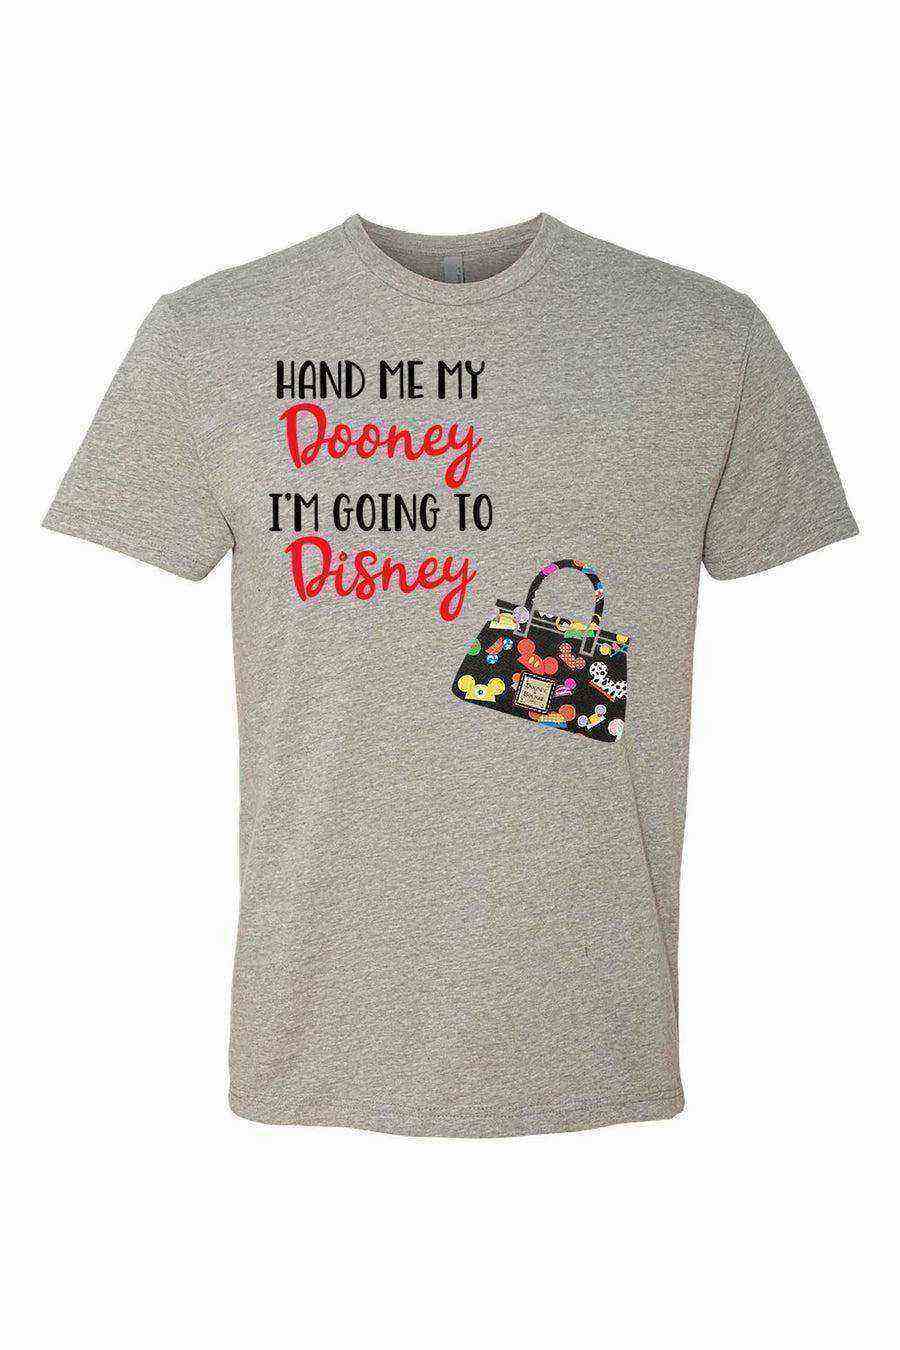 Womens | Hand Me My Dooney Im Going To Tee - Dylan's Tees